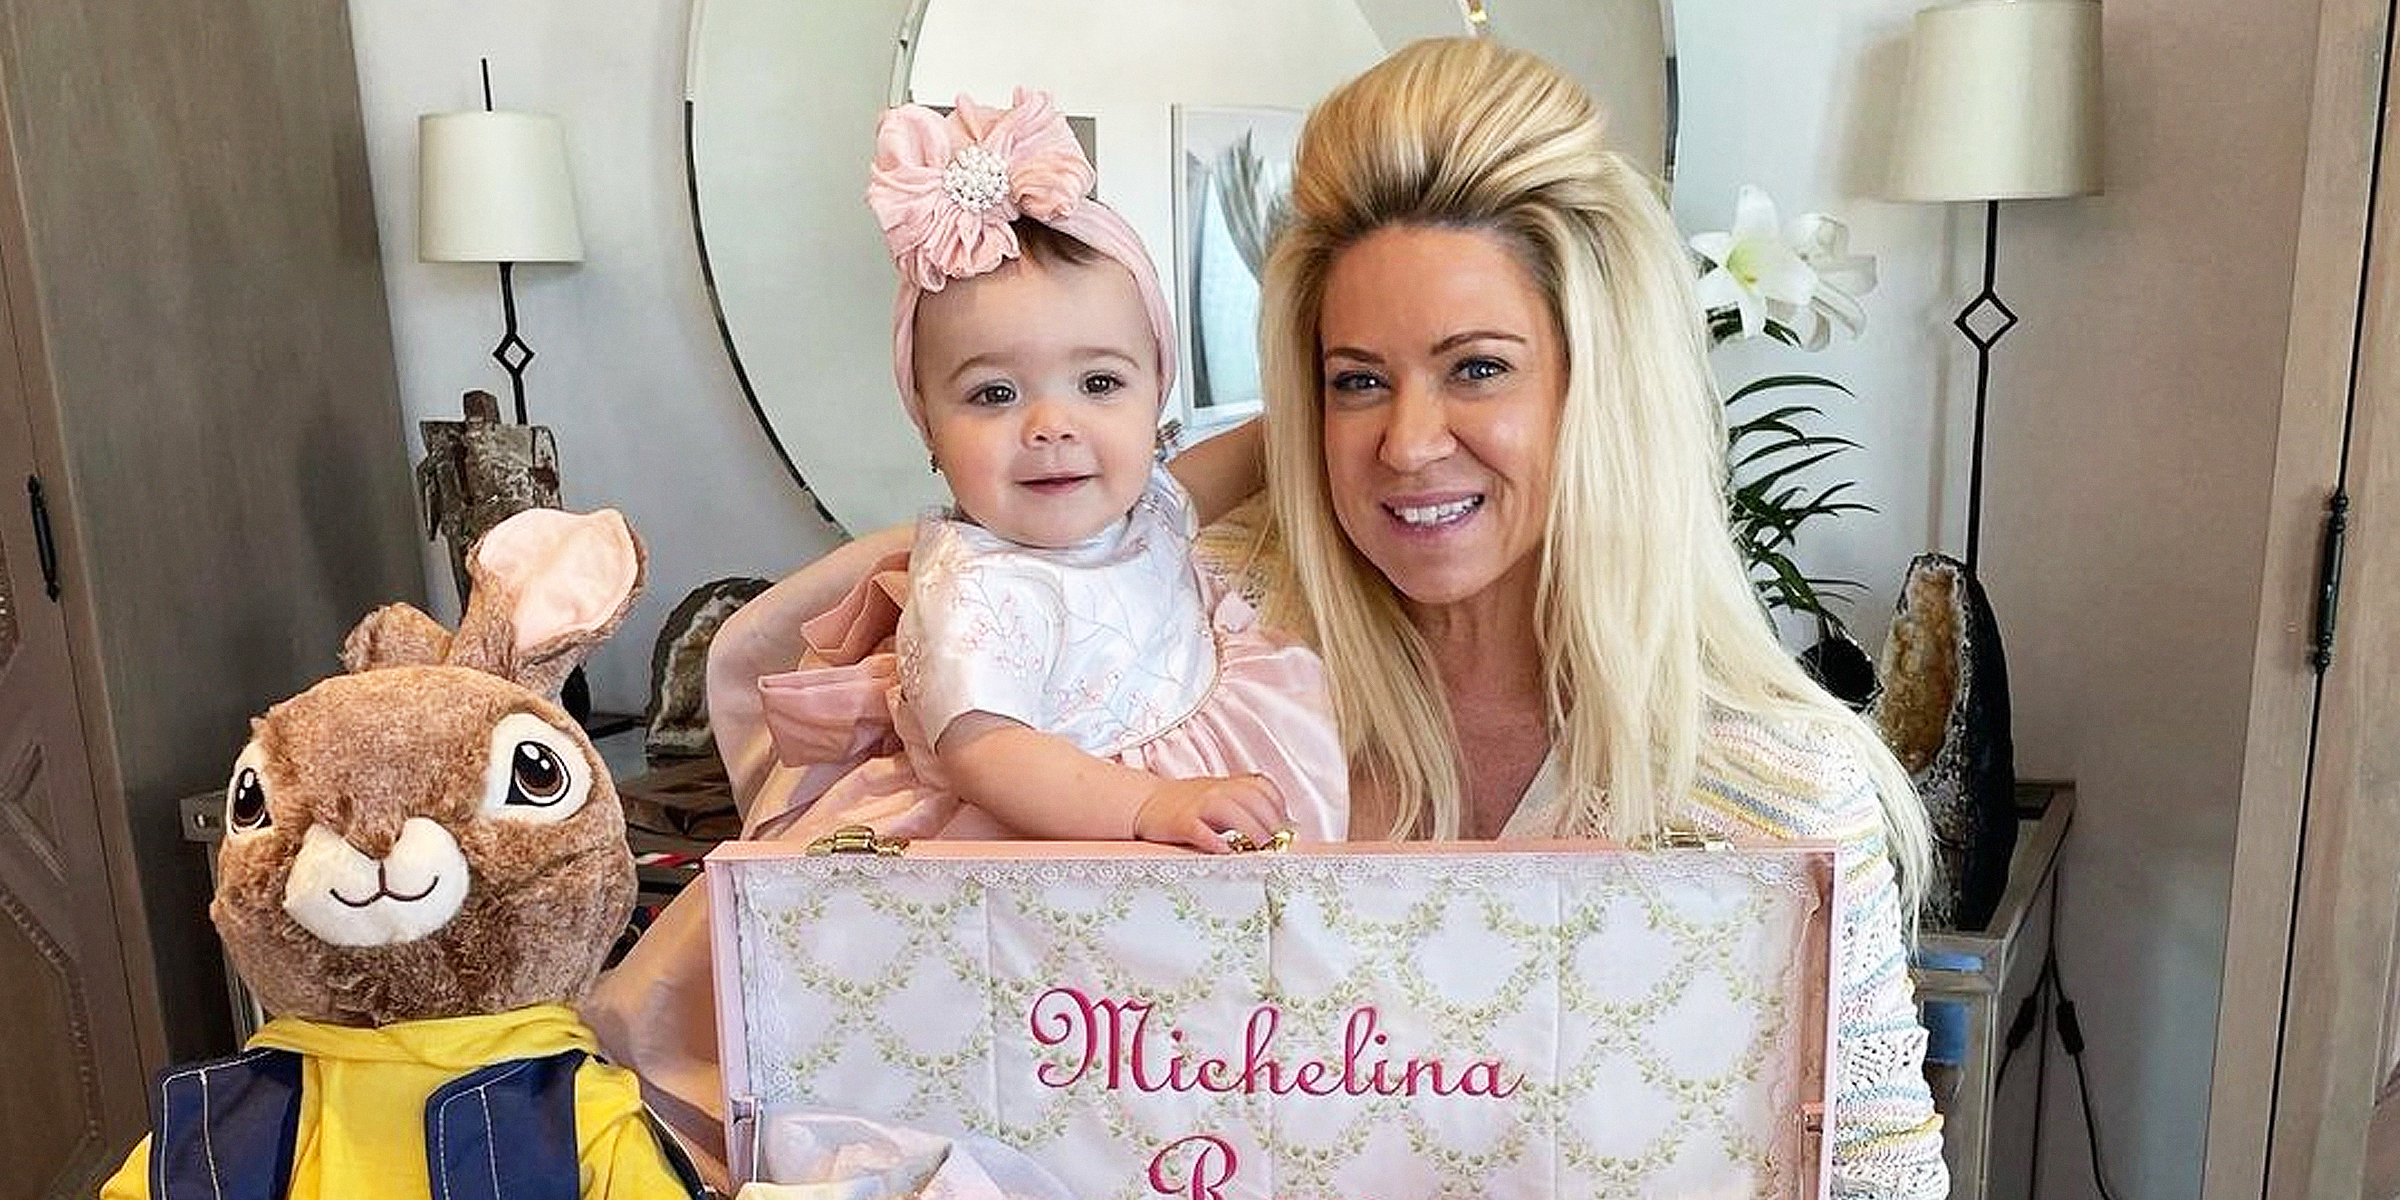 Theresa Caputo and her granddaughter | Source: Getty Images instagram.com/theresacaputo